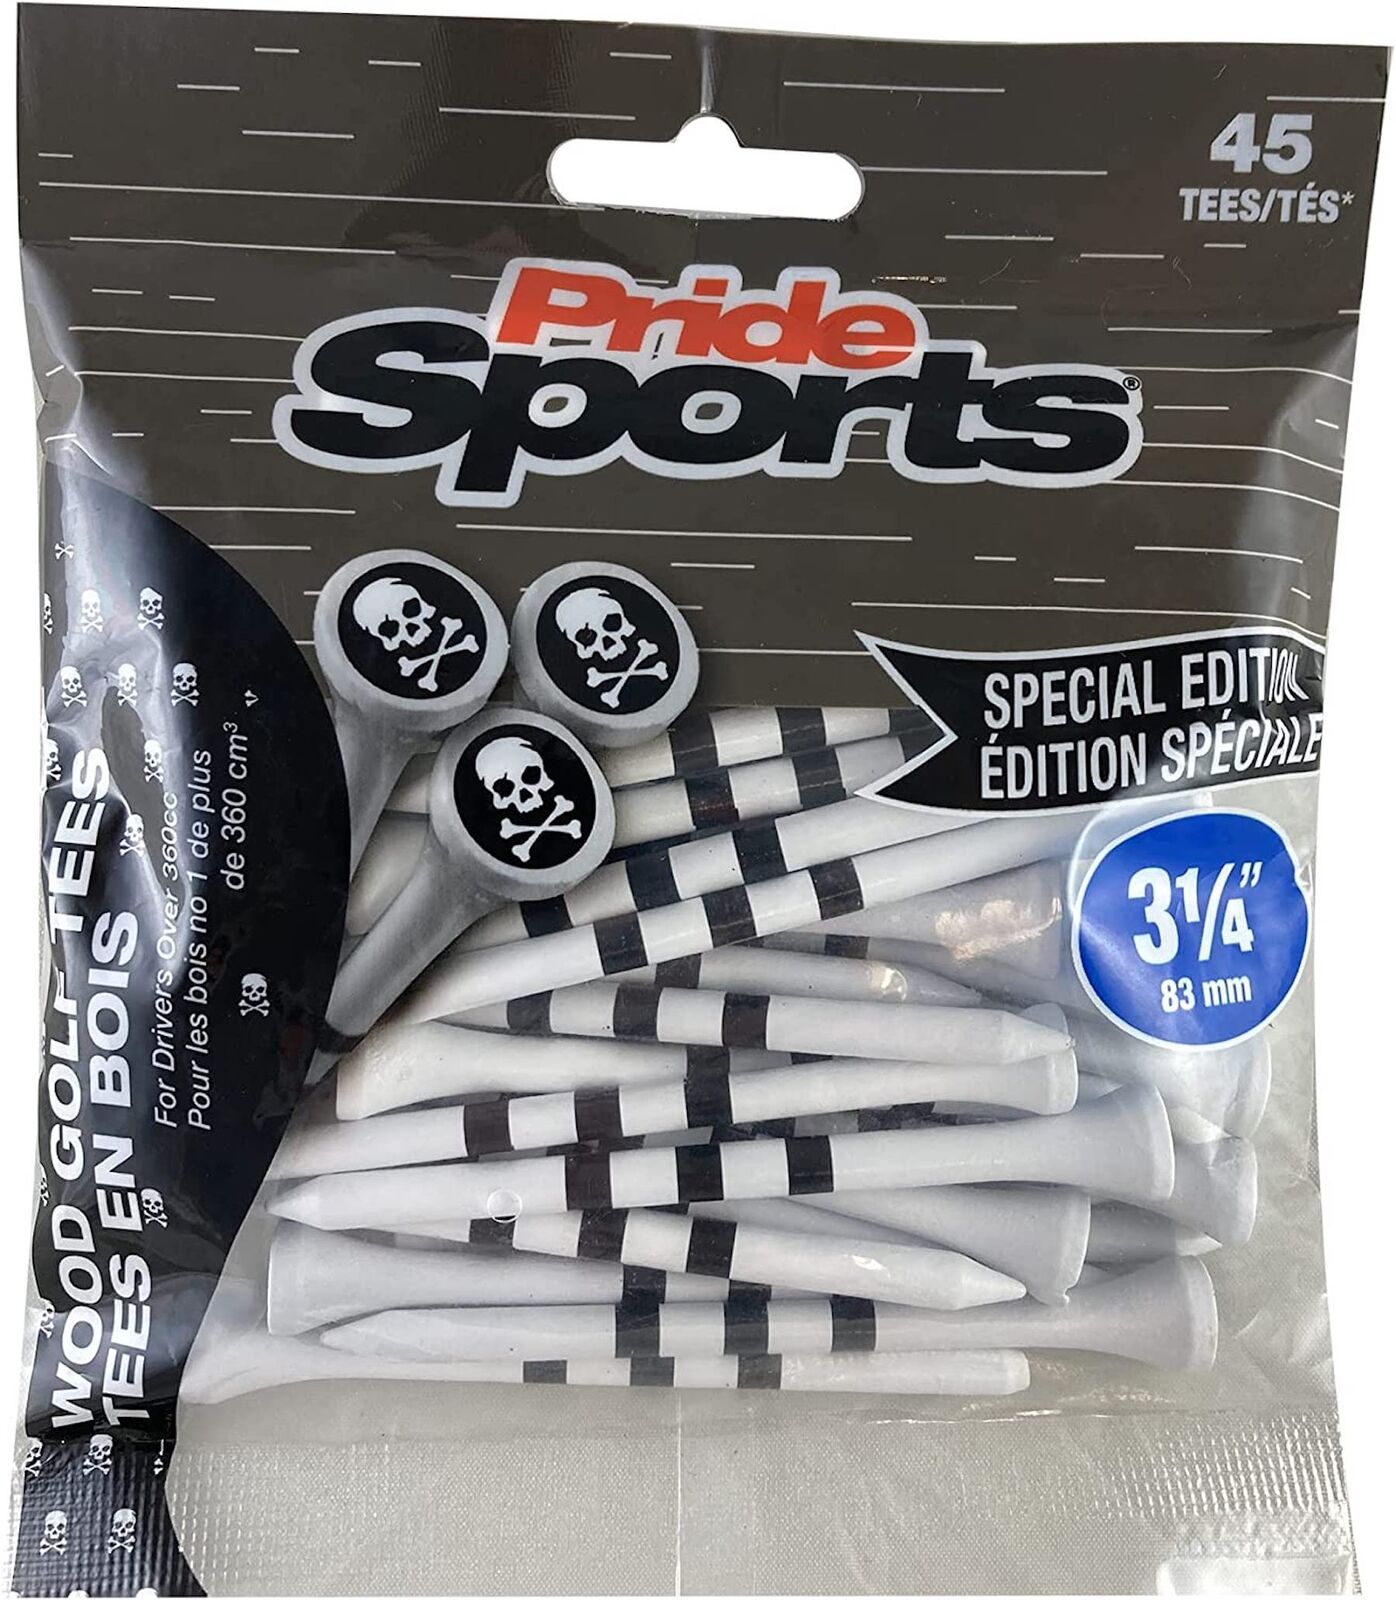 Pride Sports Skull and Stripes Wooden Tees - 45 pcs pack